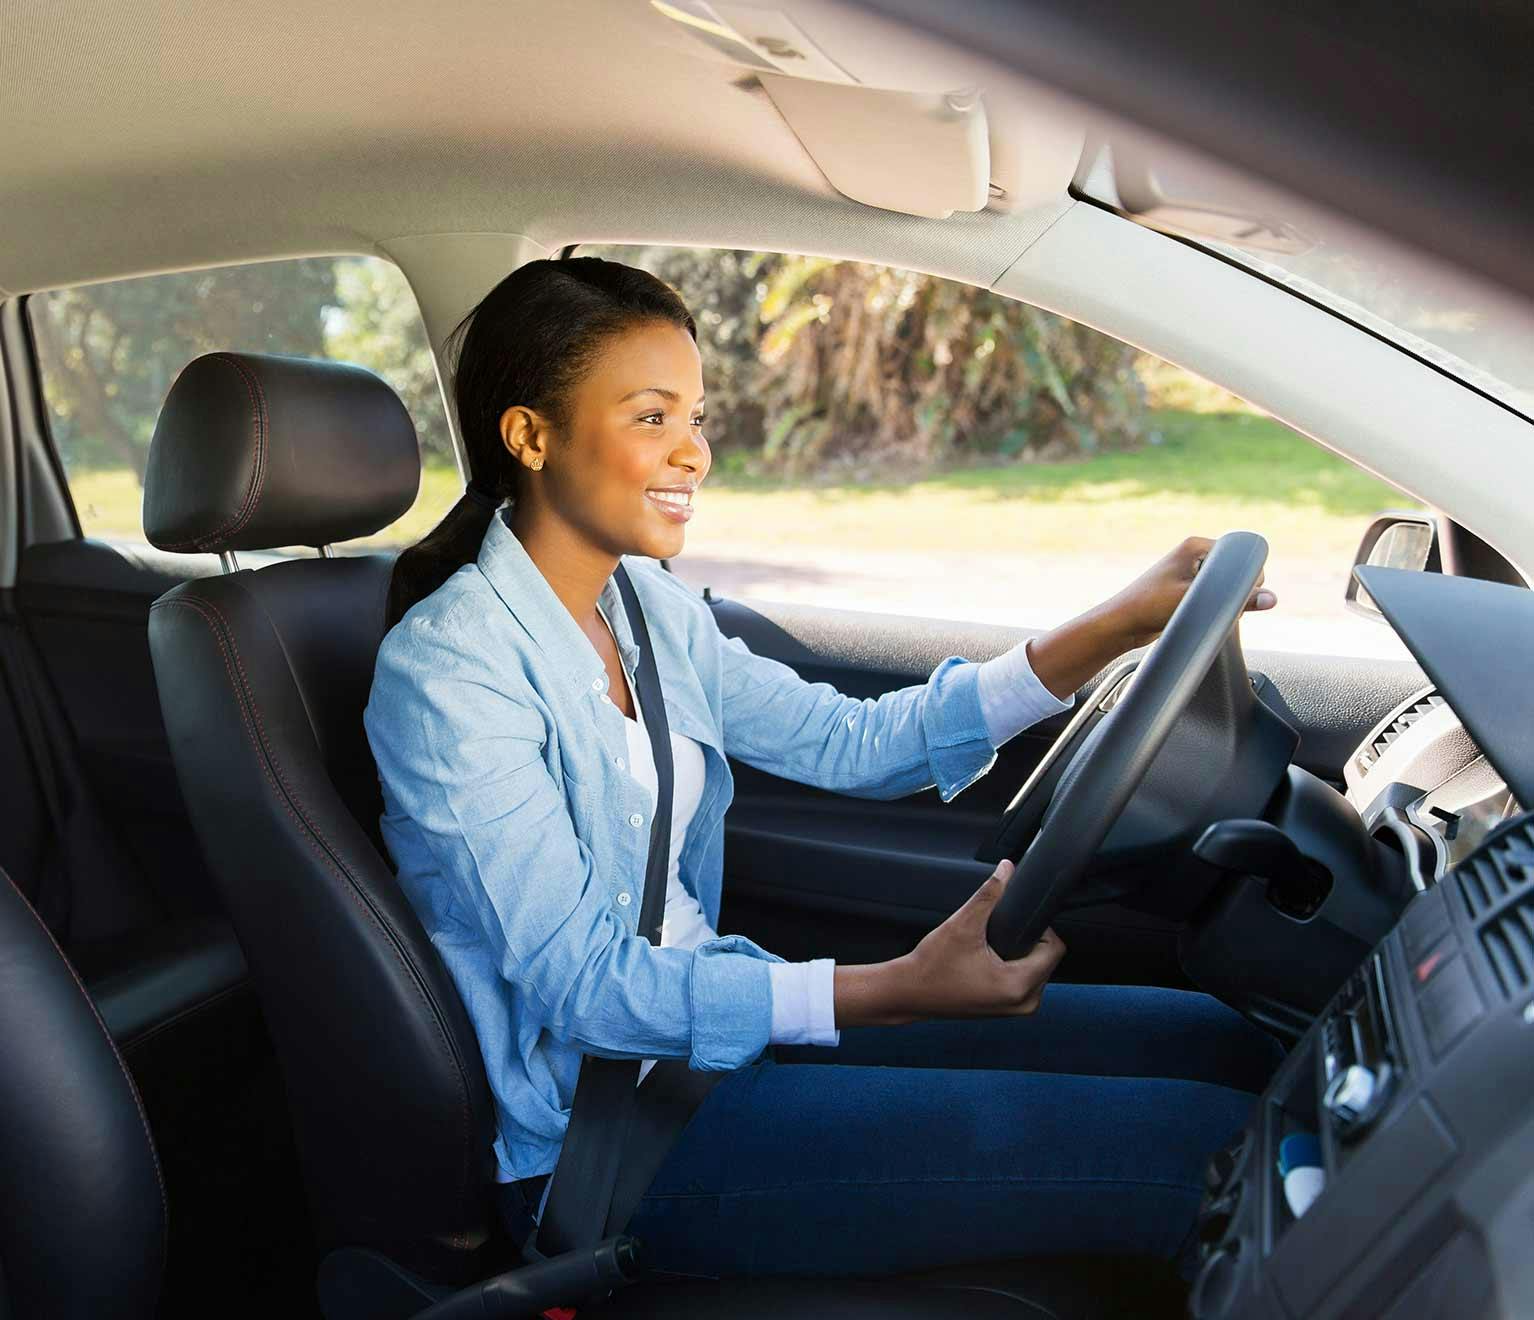 Woman driving car safely and avoiding distracted driving.